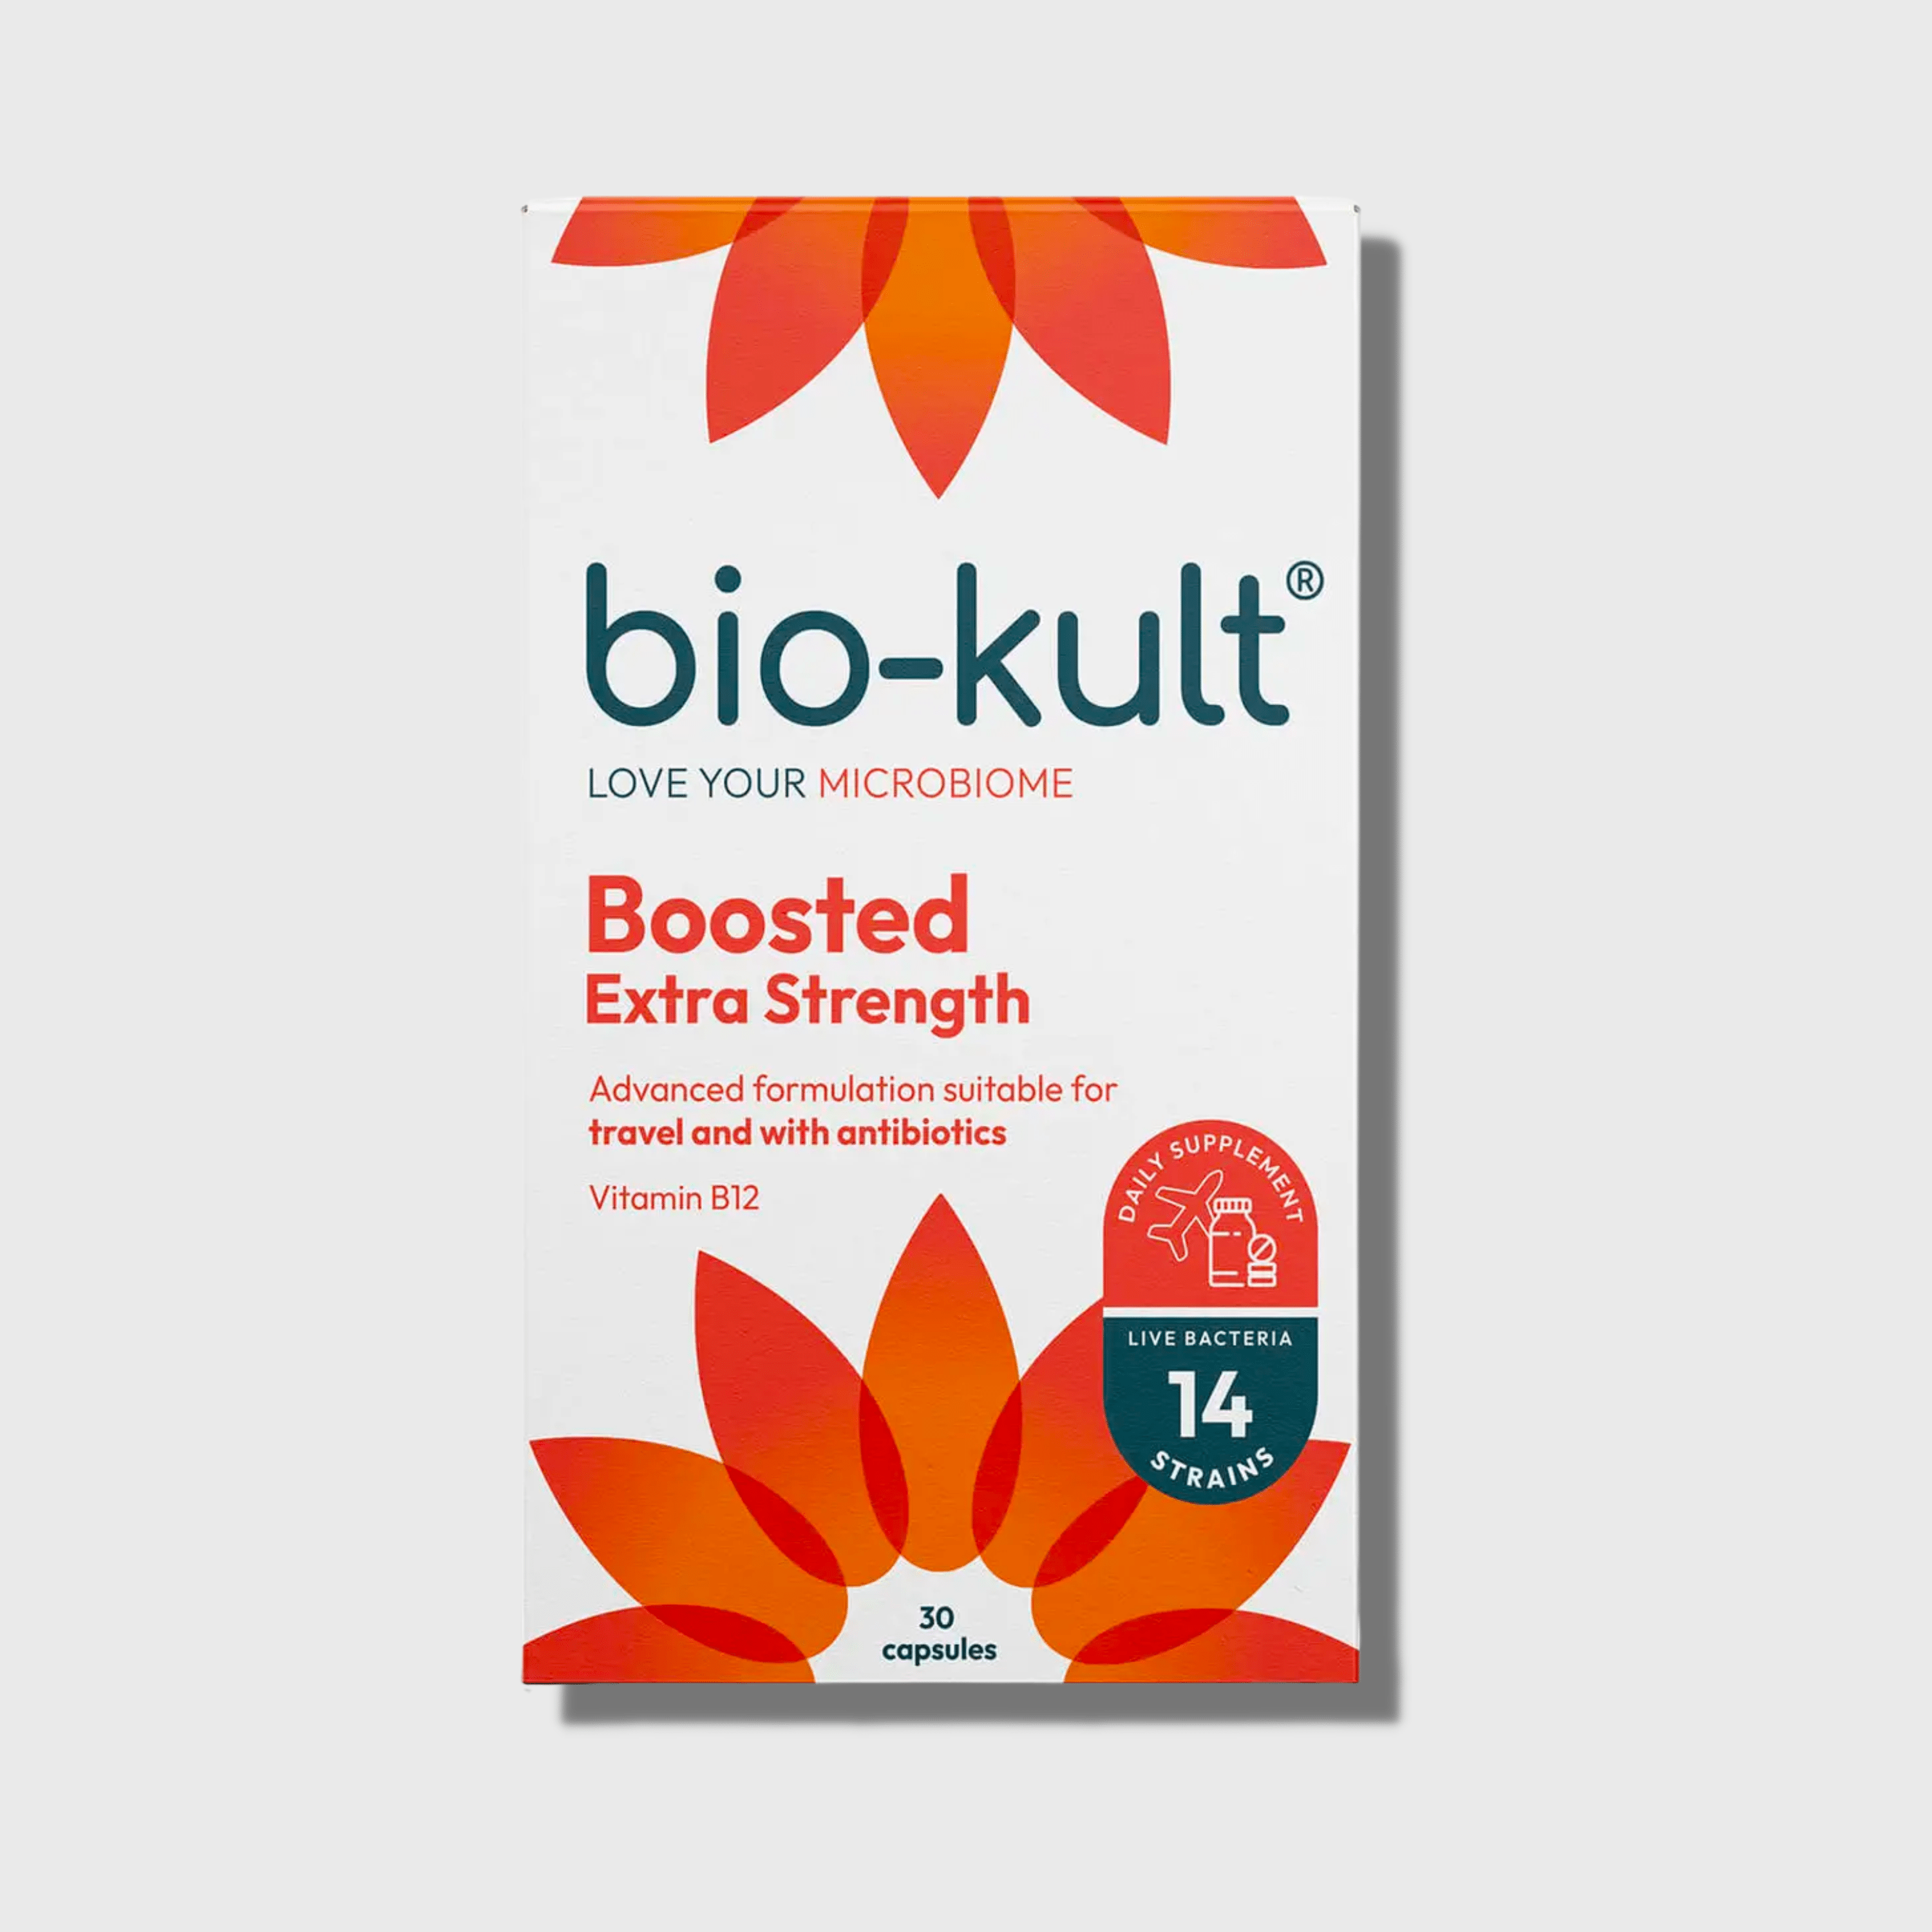 Bio-Kult Boosted Extra Strength